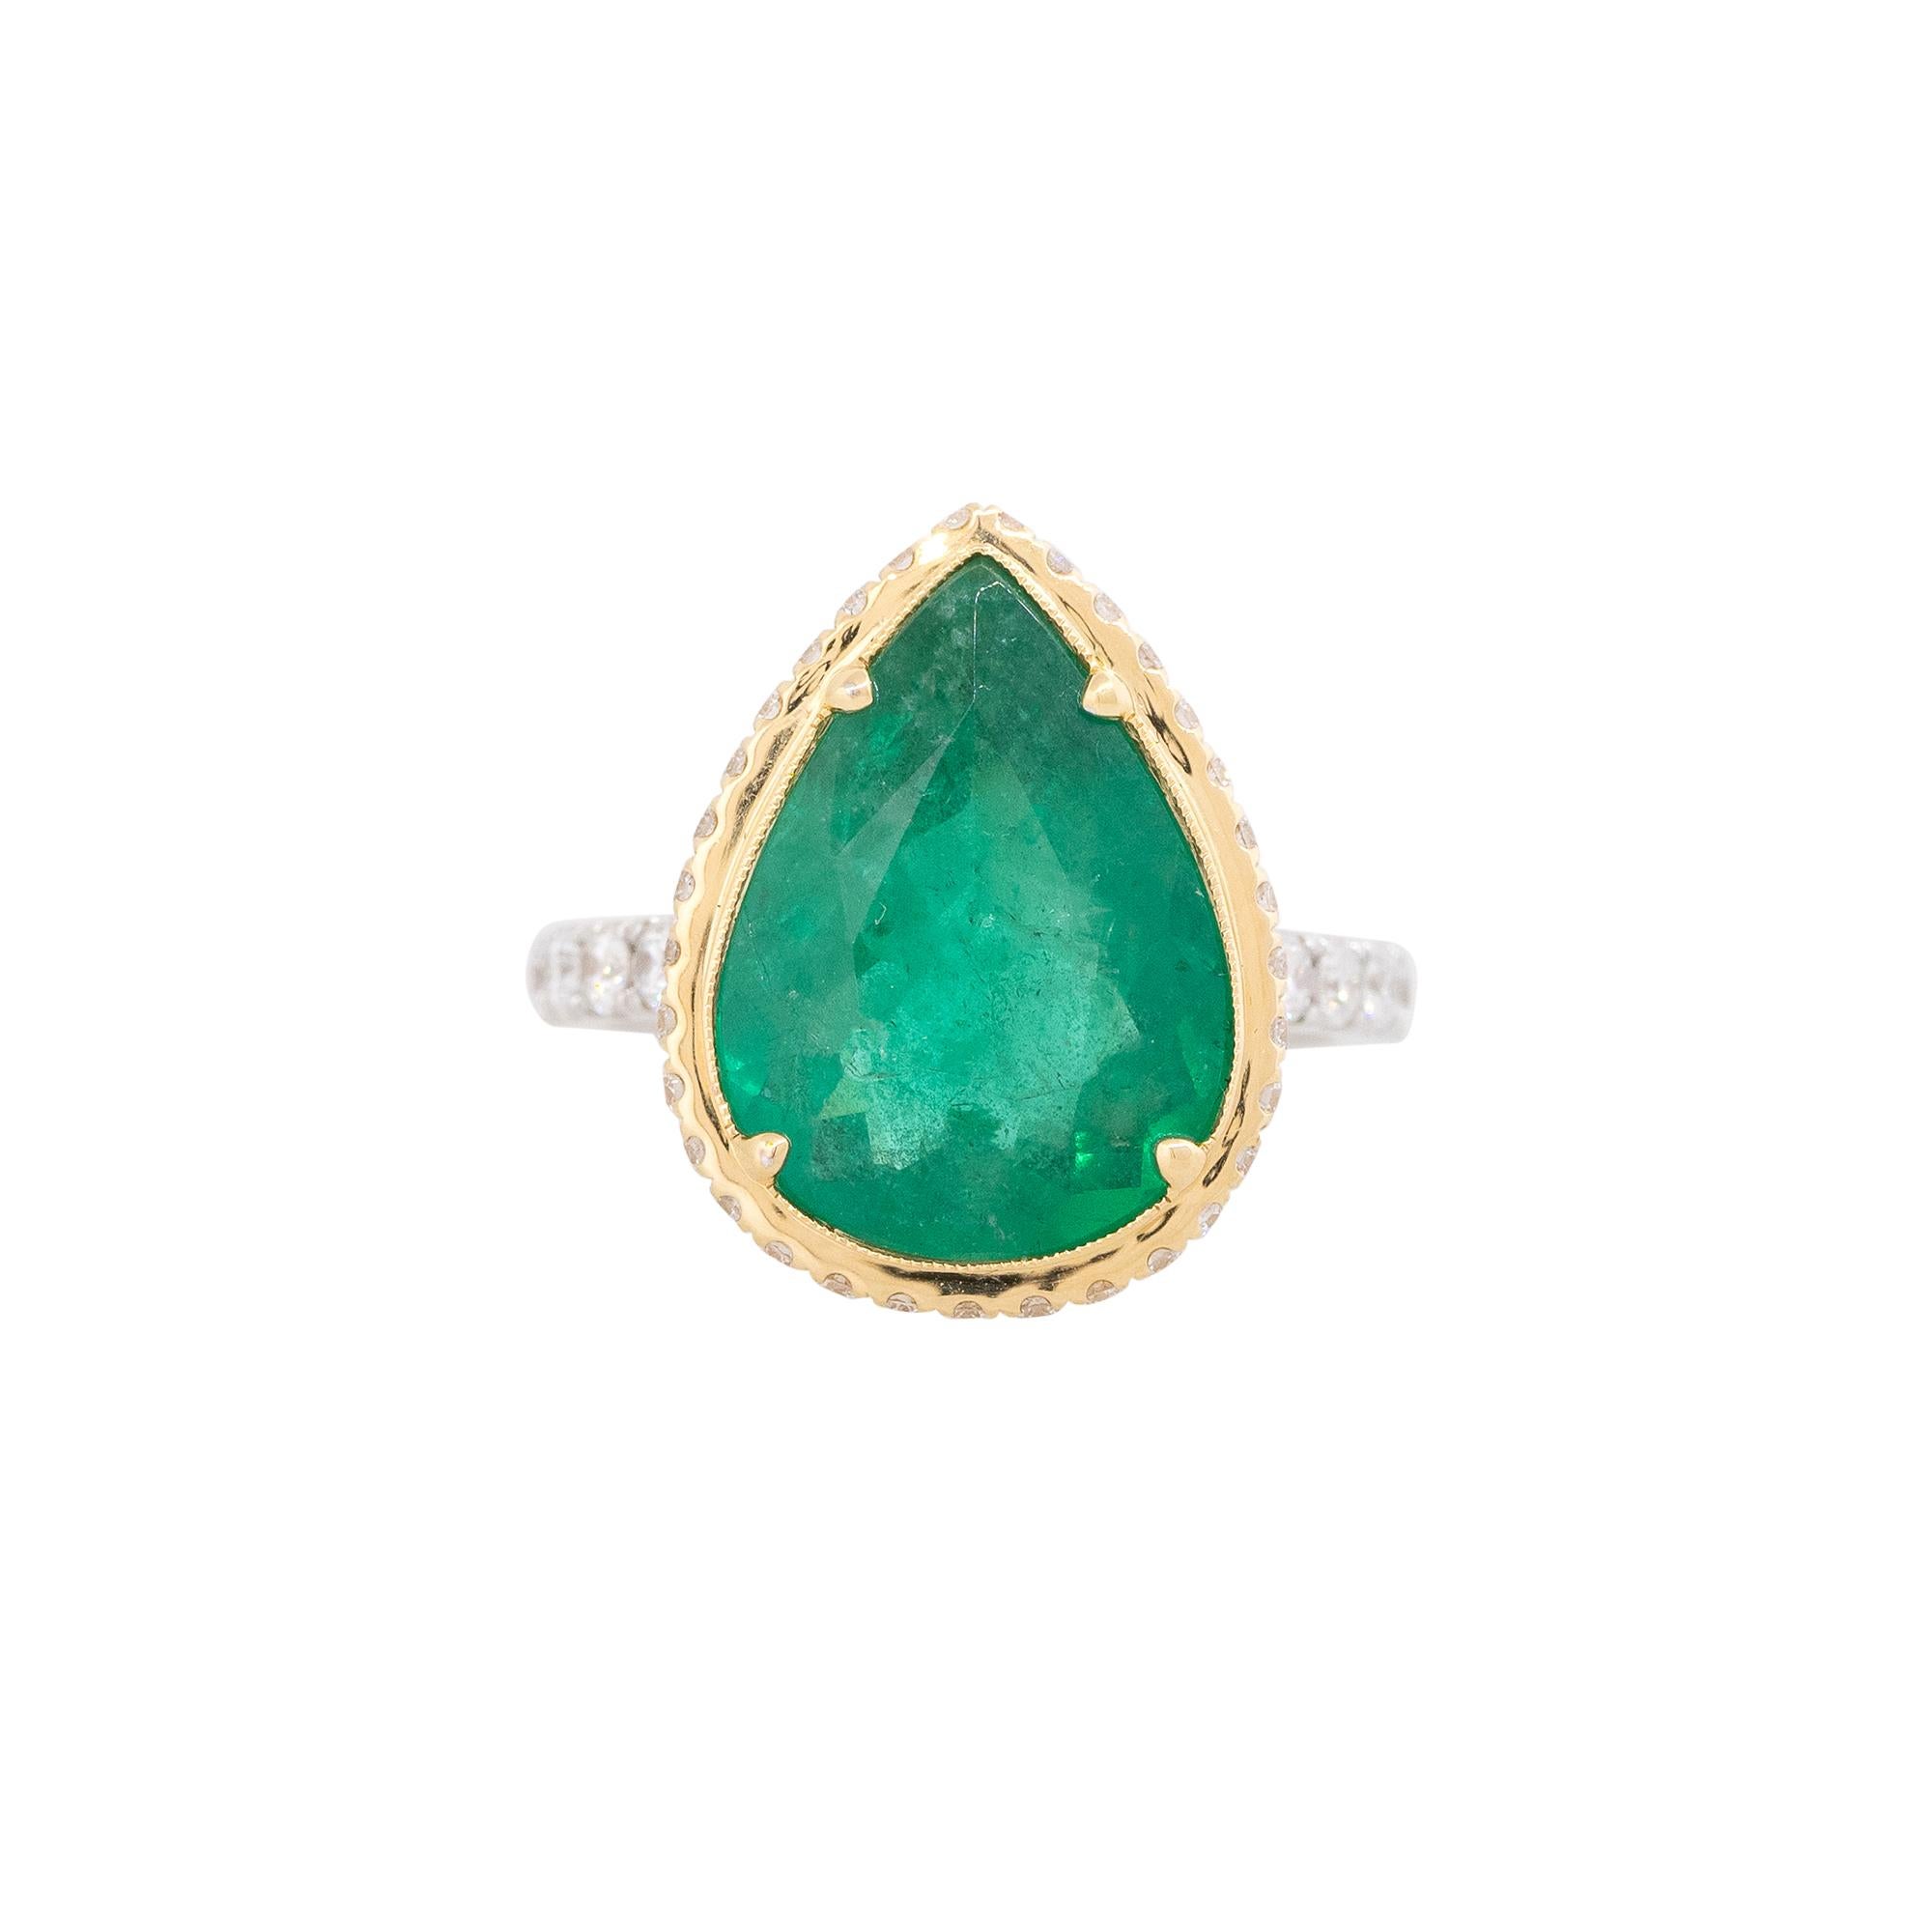 18k Two-Tone Gold 5.76ct Emerald & 0.68ct Diamond Halo Ring

Product: Emerald Gemstone and Diamond Halo Ring
Material: 18k White Gold & 18k Yellow Gold
Gemstone/ Diamond Details: The main stone is a Pear Shaped Emerald Gemstone, weighing